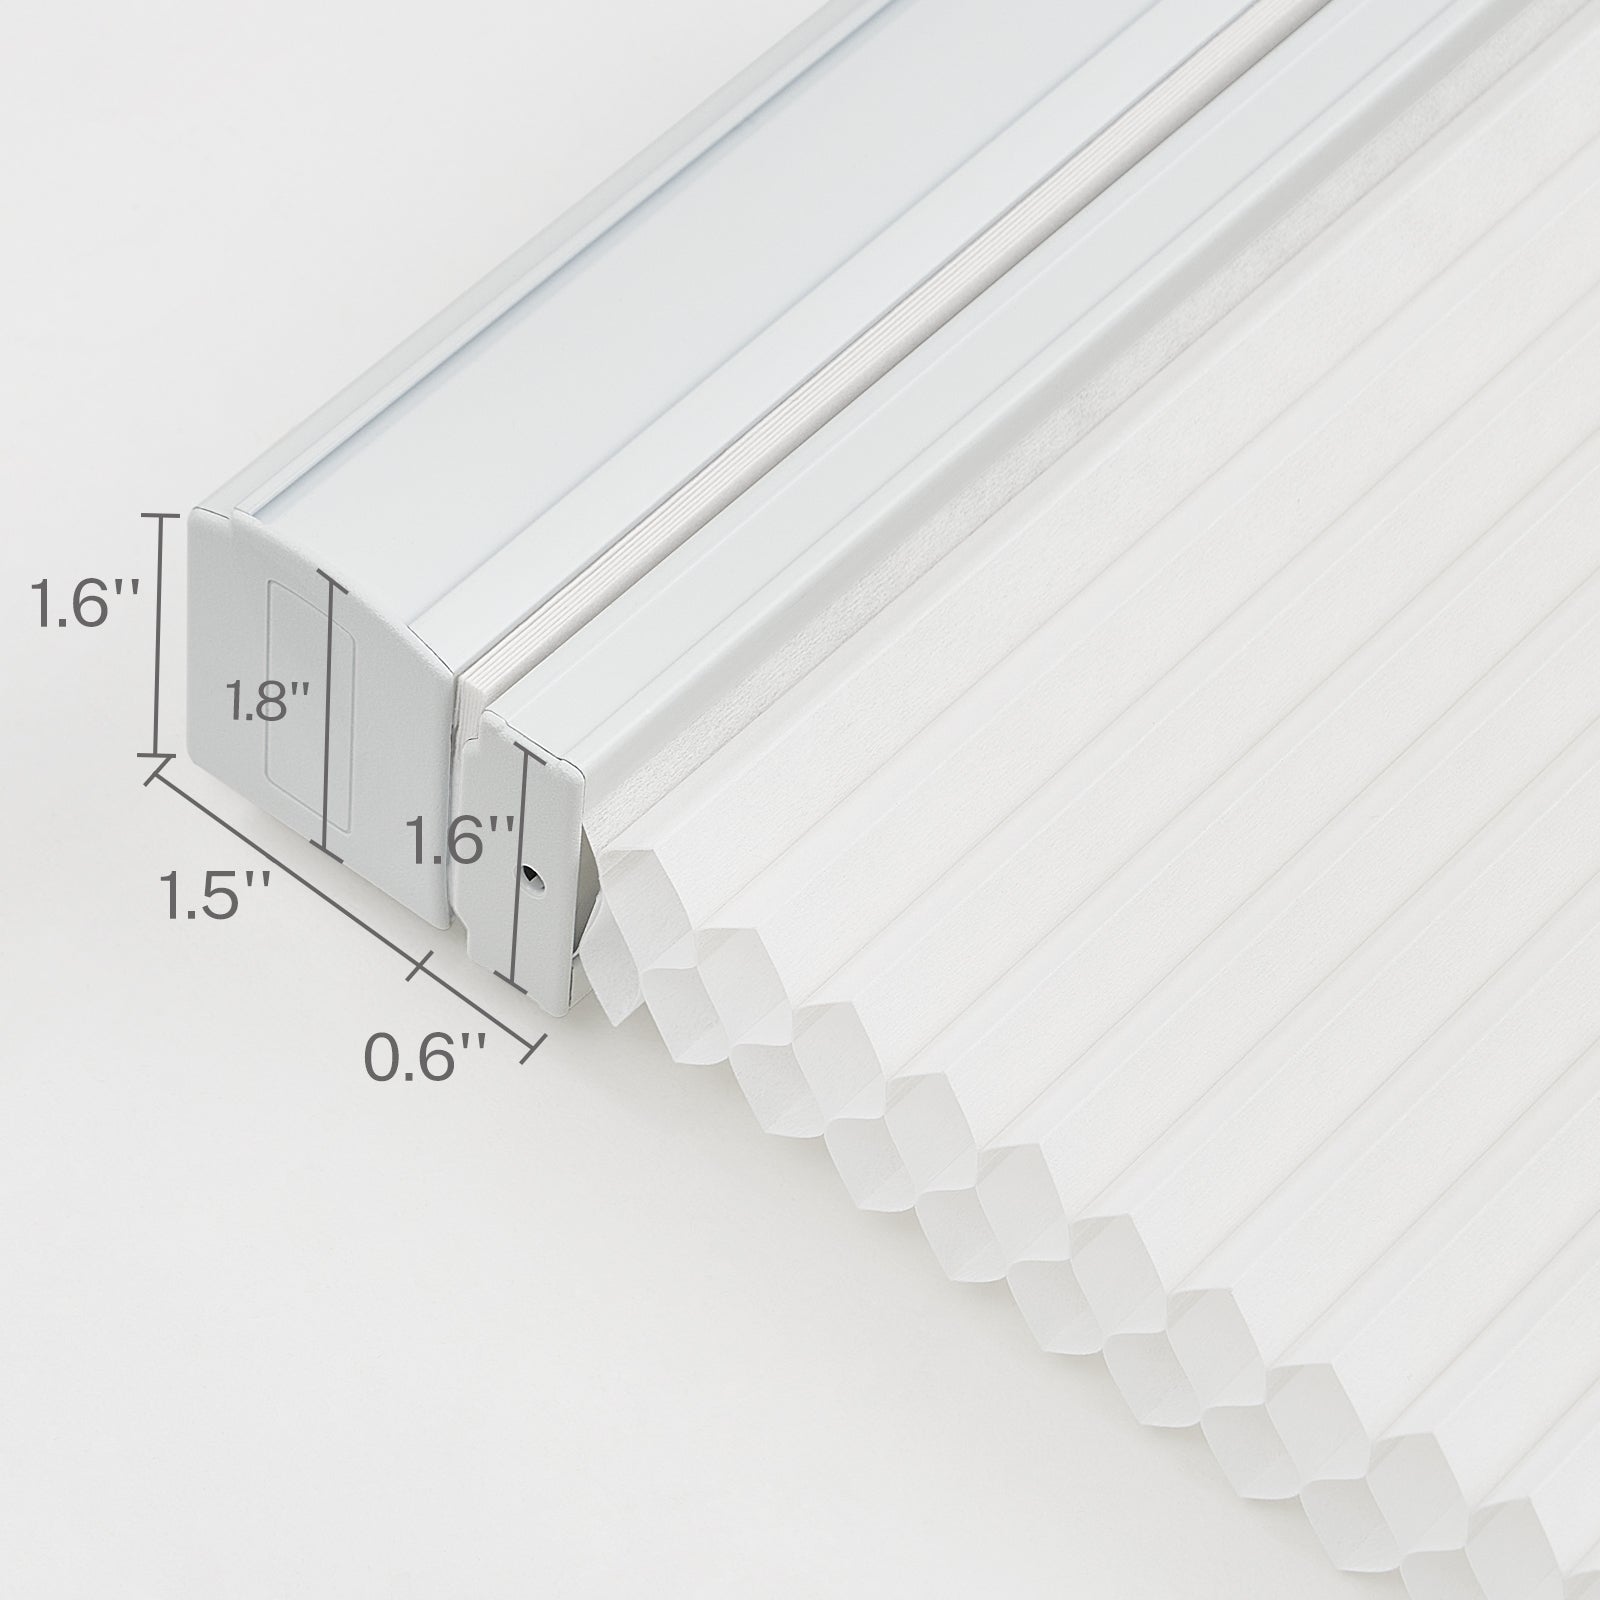 Double Cell Top Down Bottom Up Cellular Shades Cordless Aluminium Rail